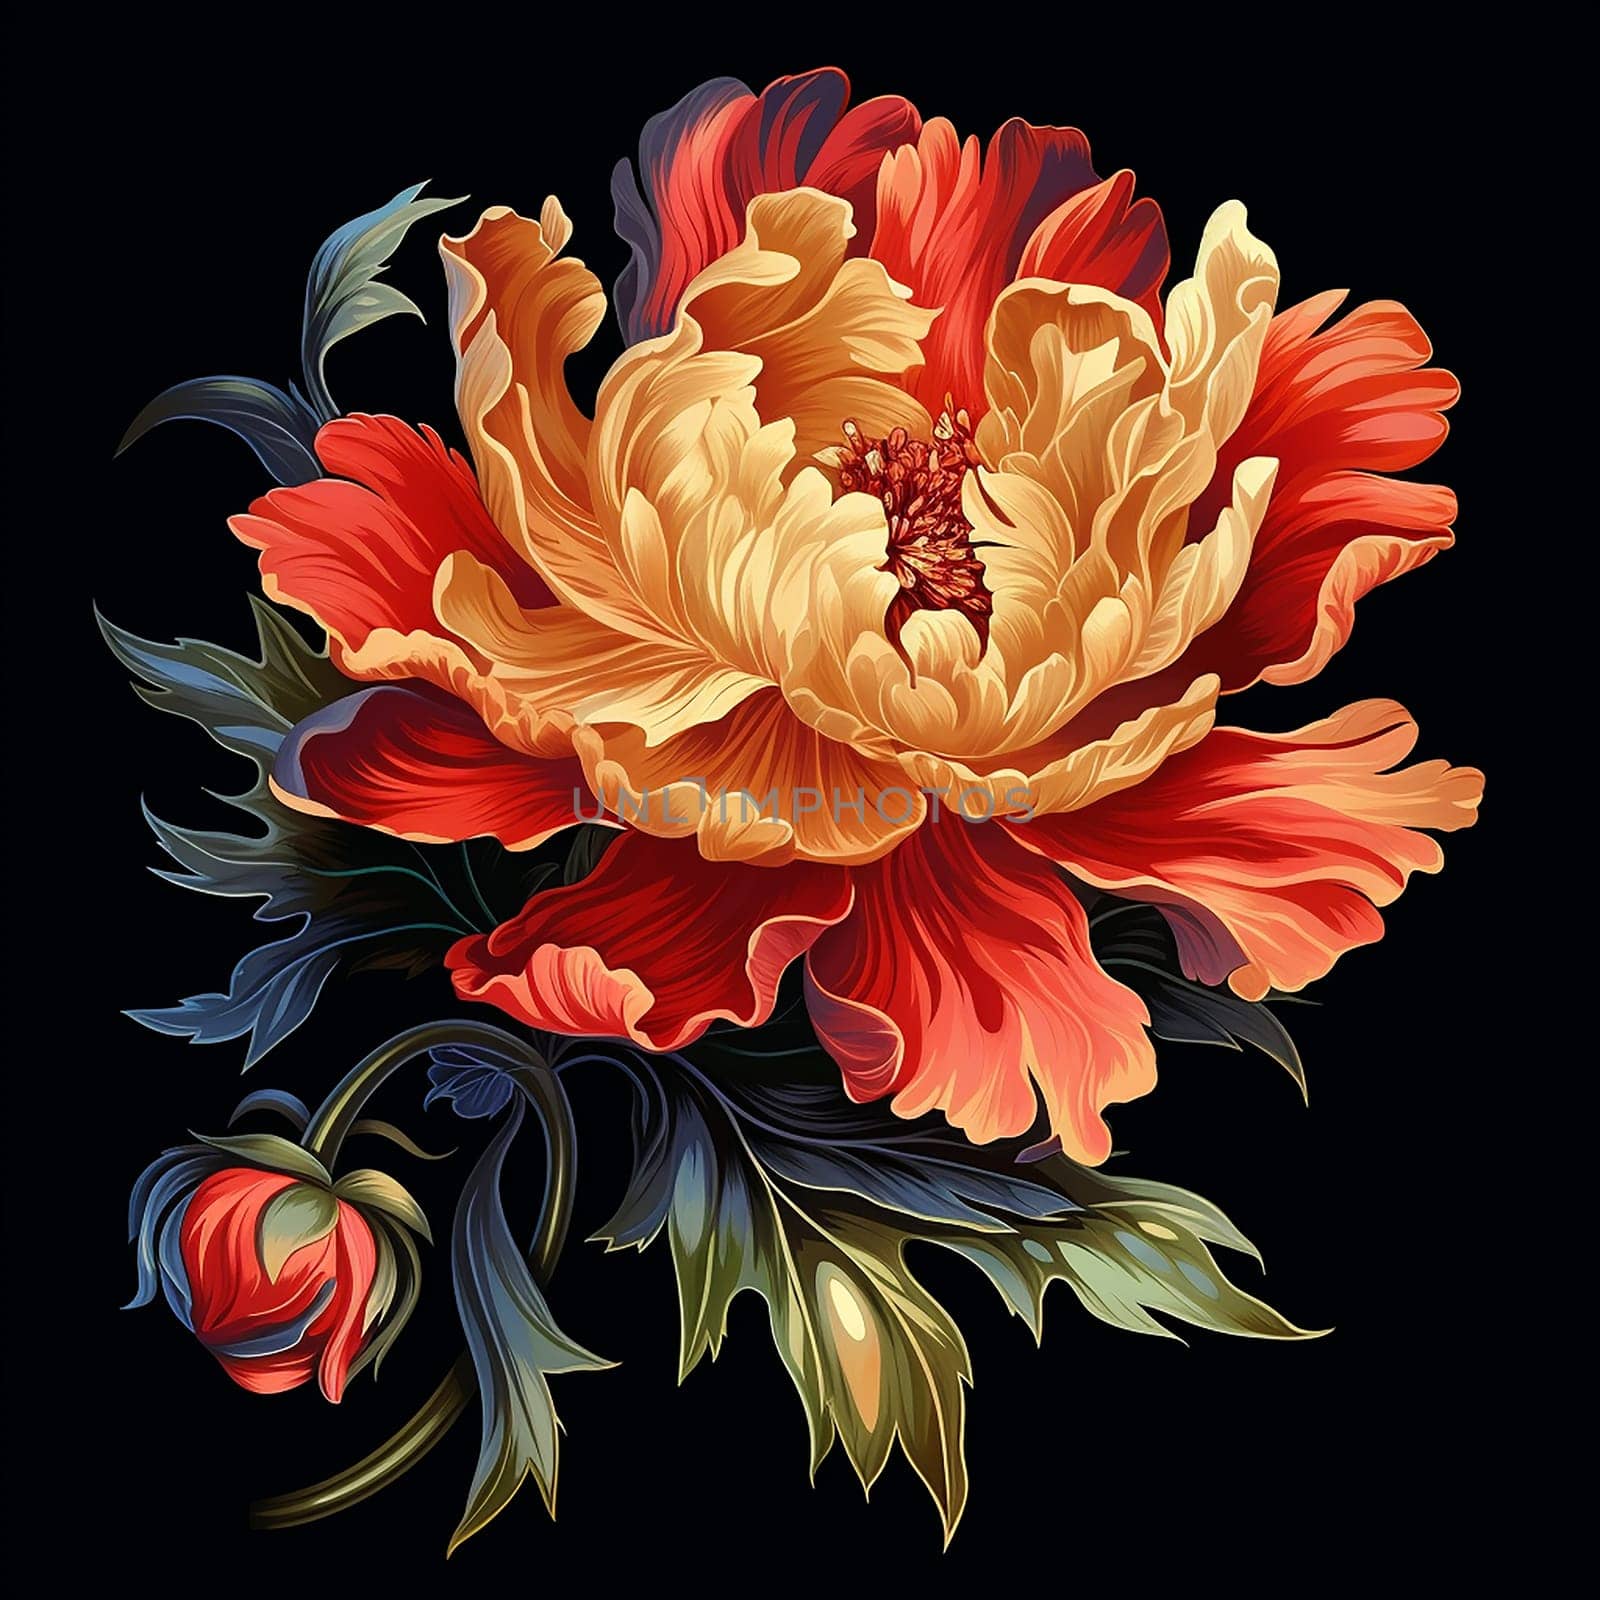 Vibrant digital artwork of a blooming red and orange flower with dark background. by Hype2art